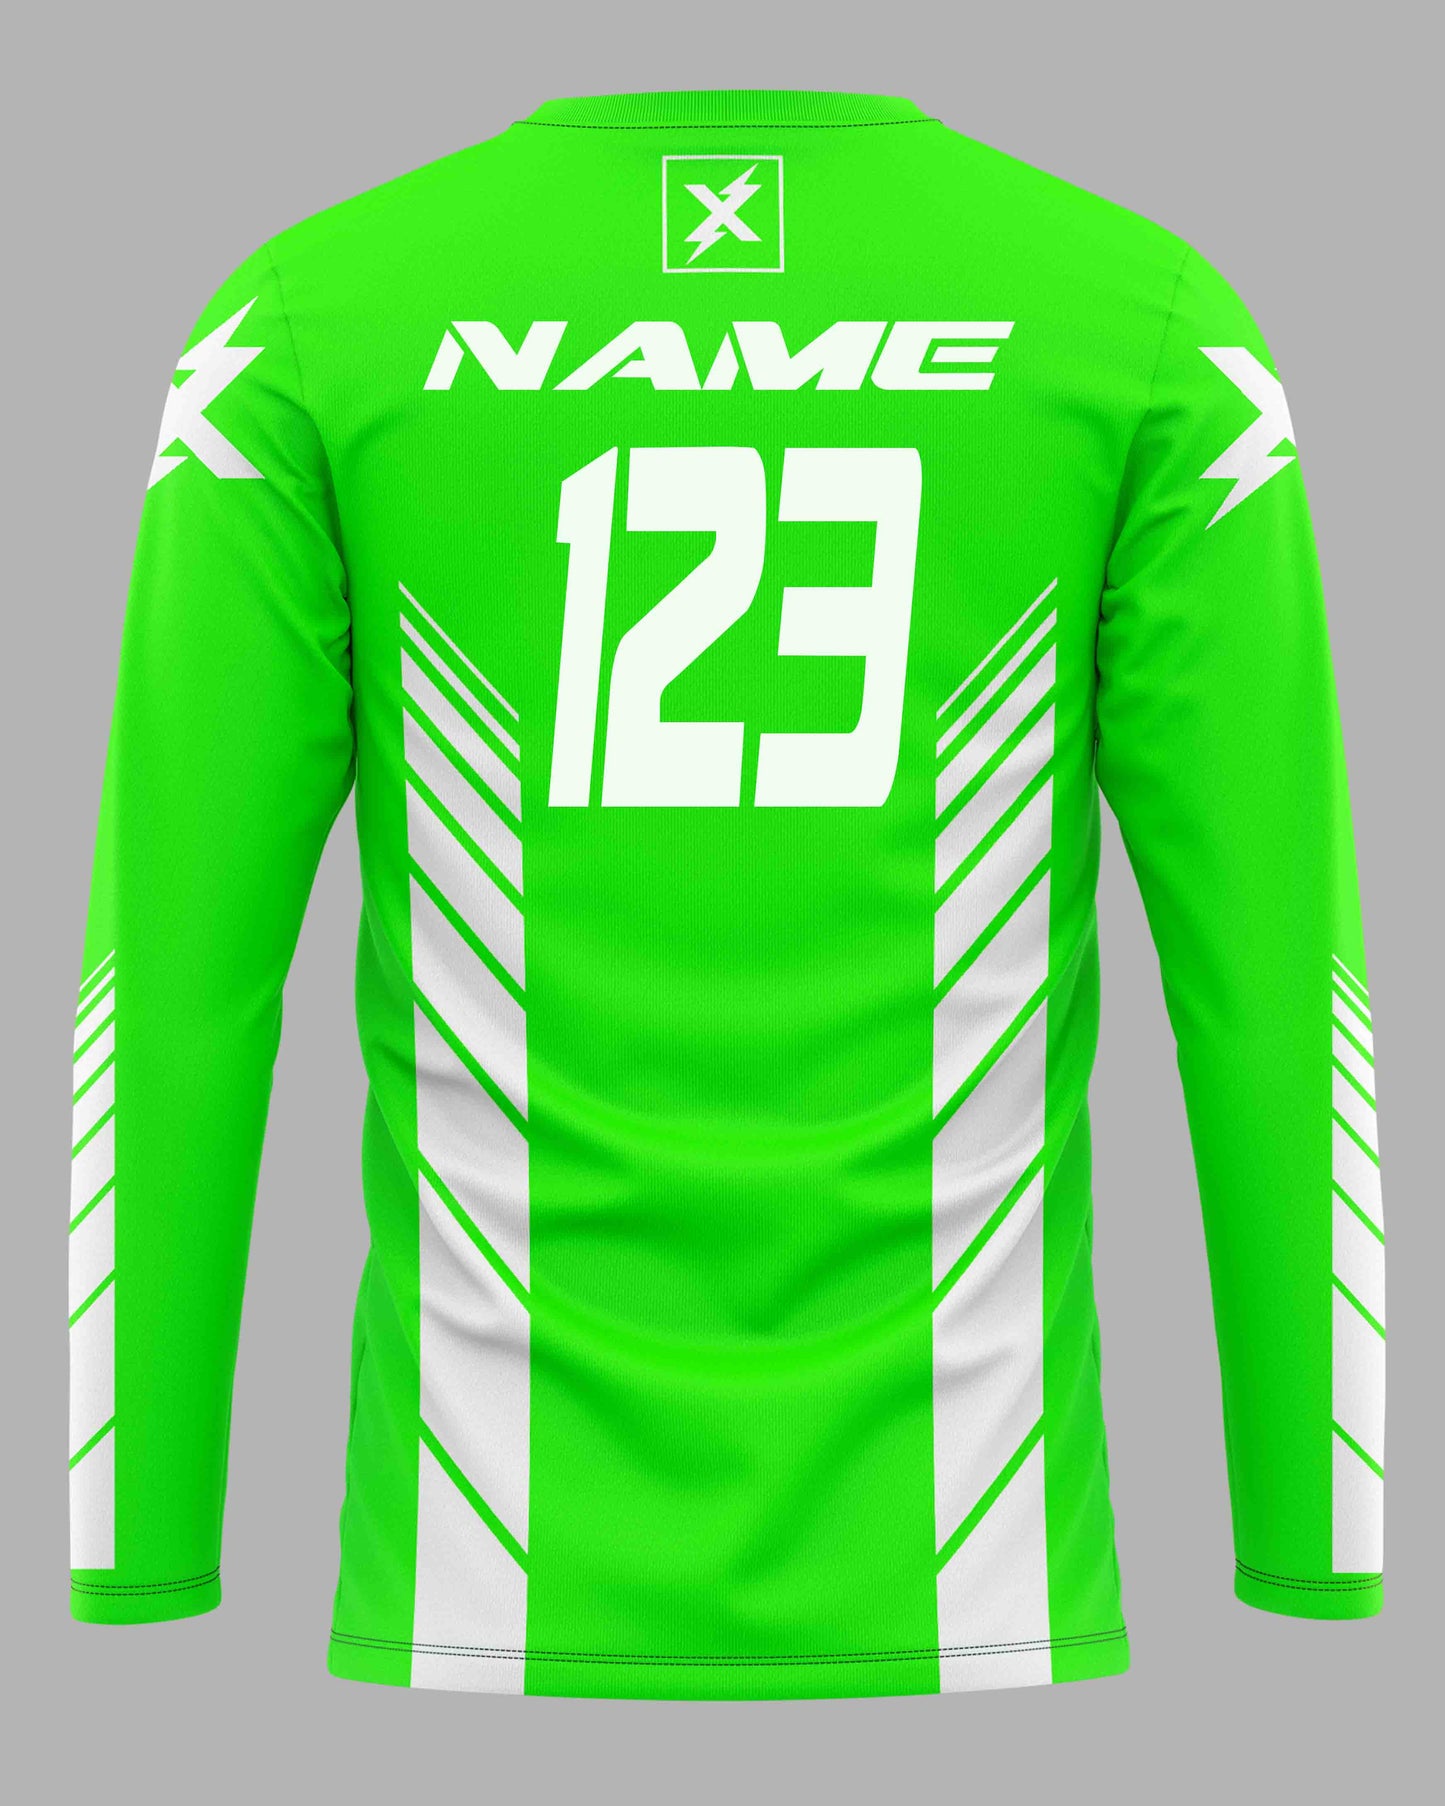 Jersey Speed Lines Green - FREE Custom Sublimation